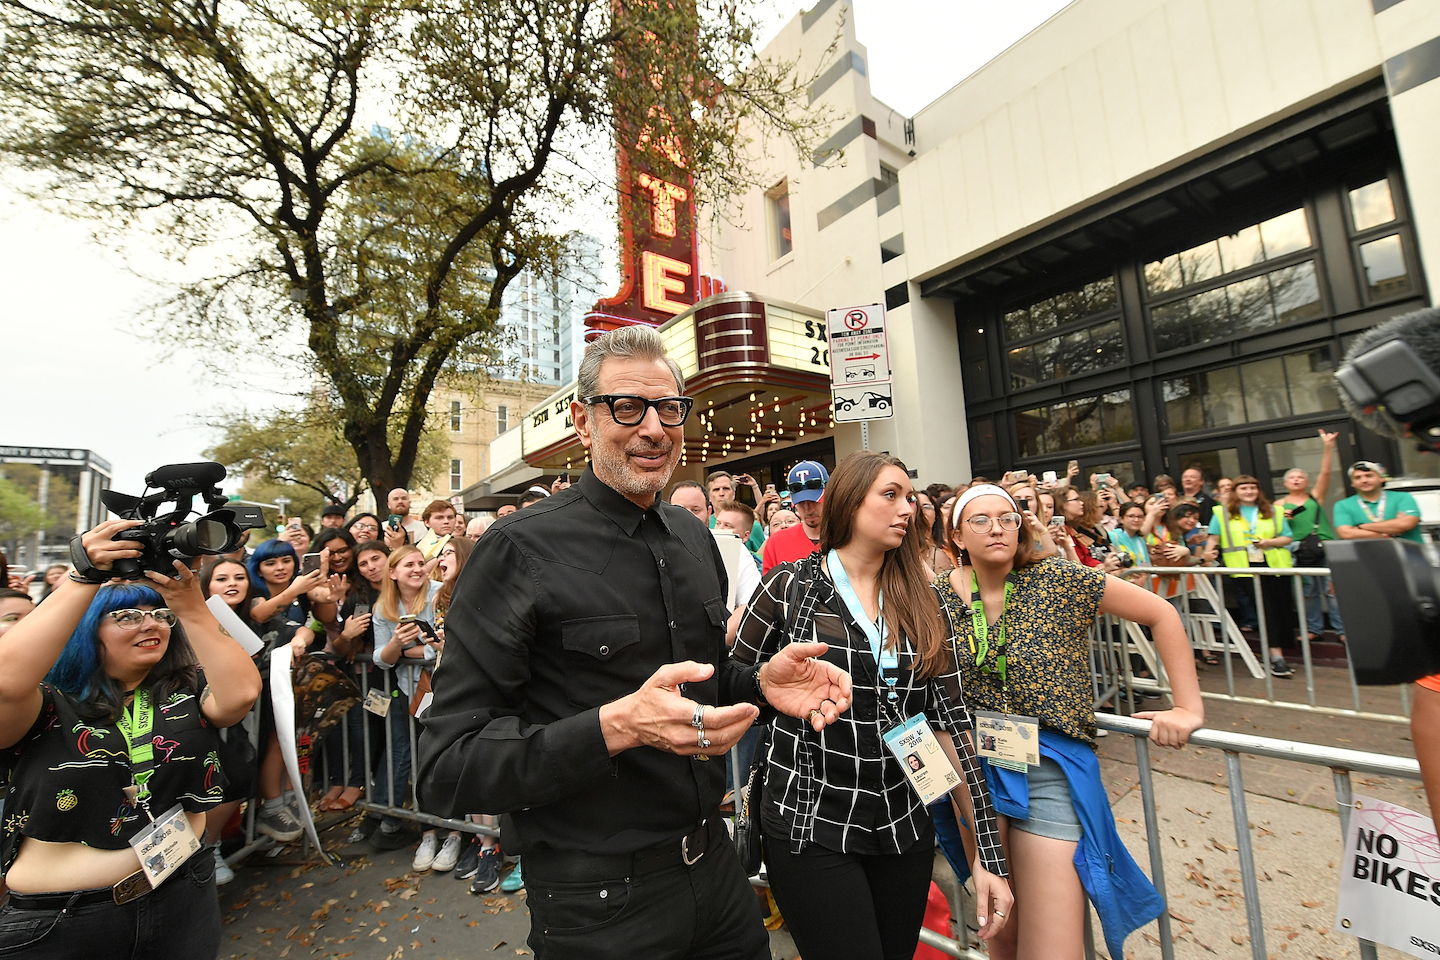 Jeff Goldblum at the Isle of Dogs Premiere. Photo by Michael Loccisano/Getty Images for SXSW